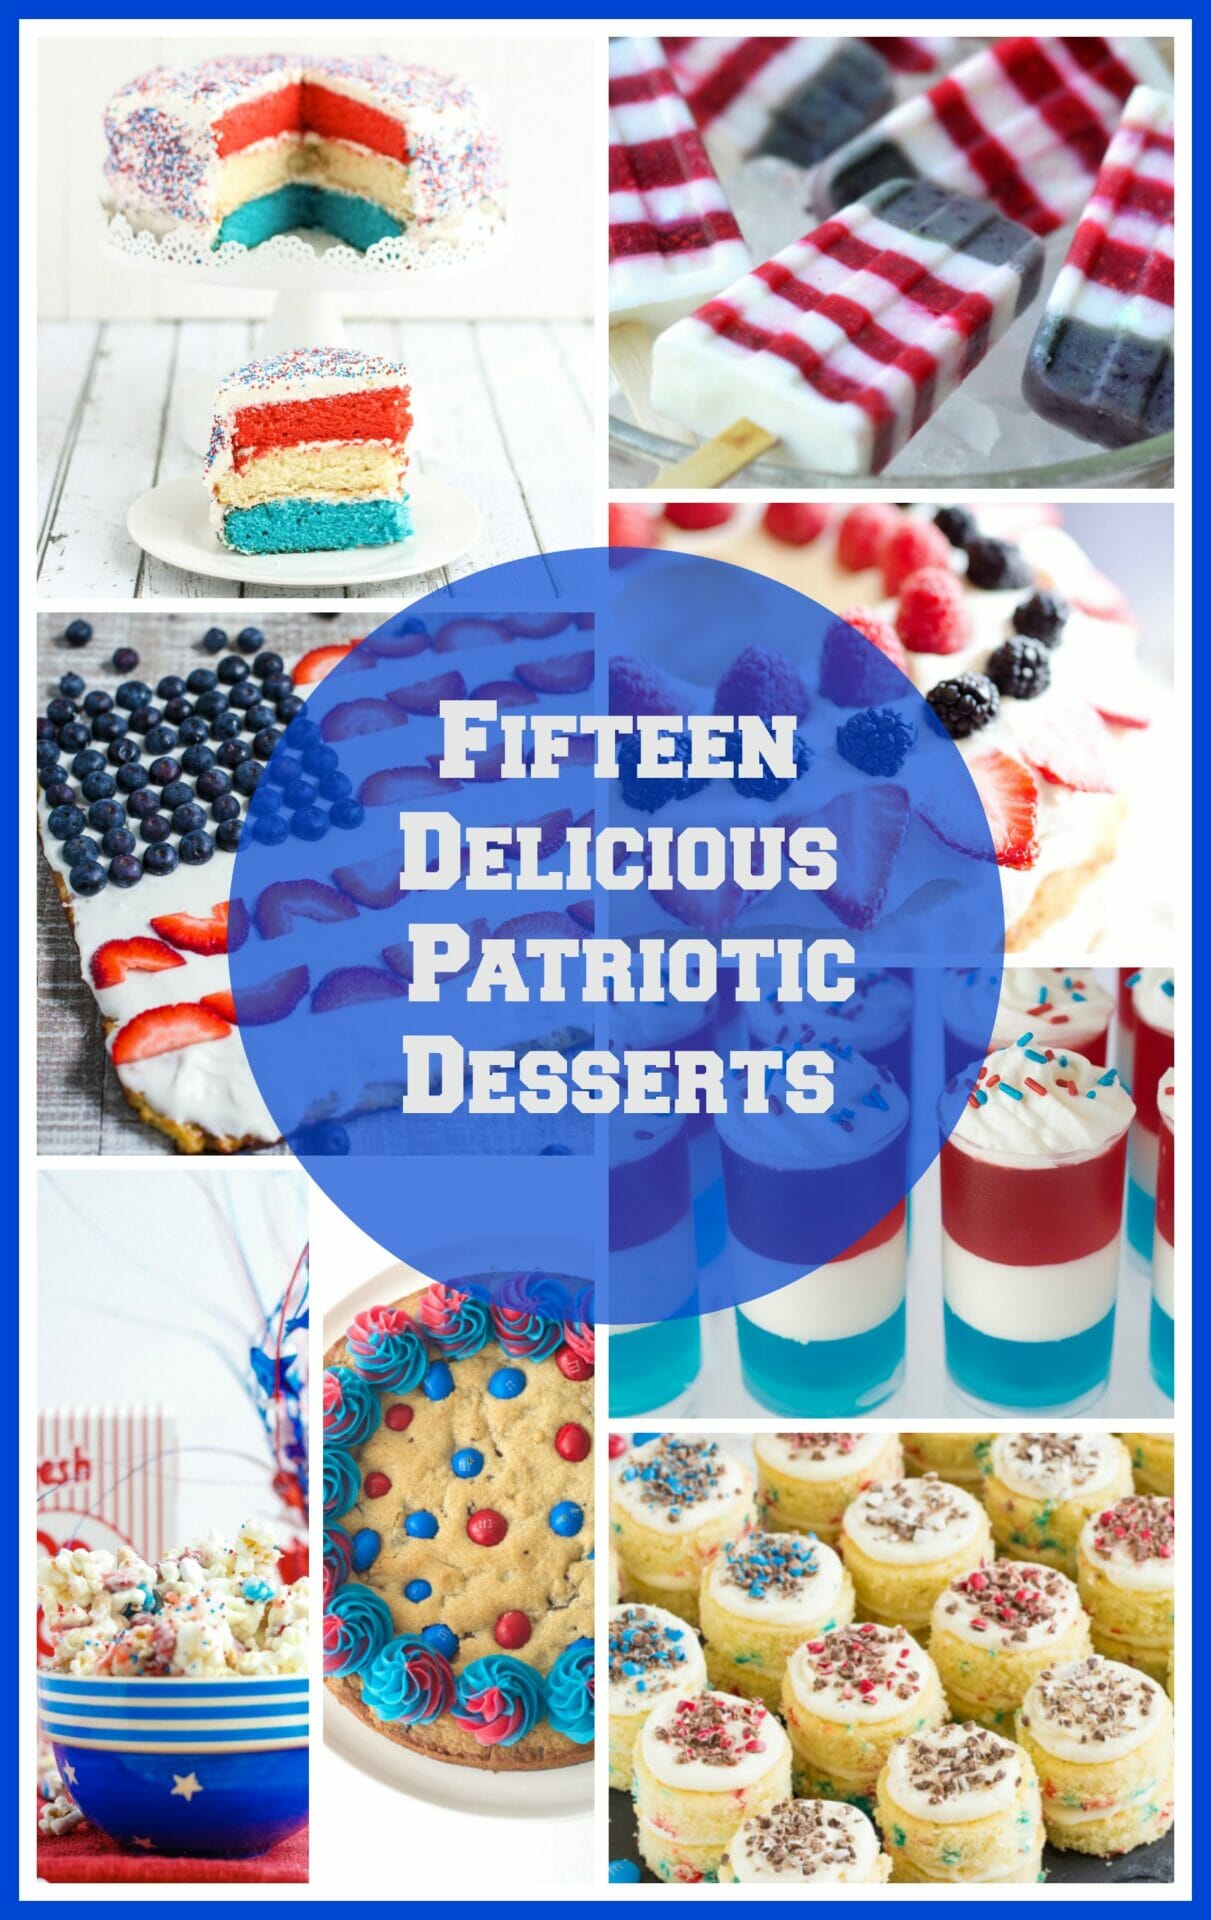 Fifteen Amazing Red, White, and Blue Desserts! Perfect if you need an easy recipe for Memorial Day or the 4th of July!